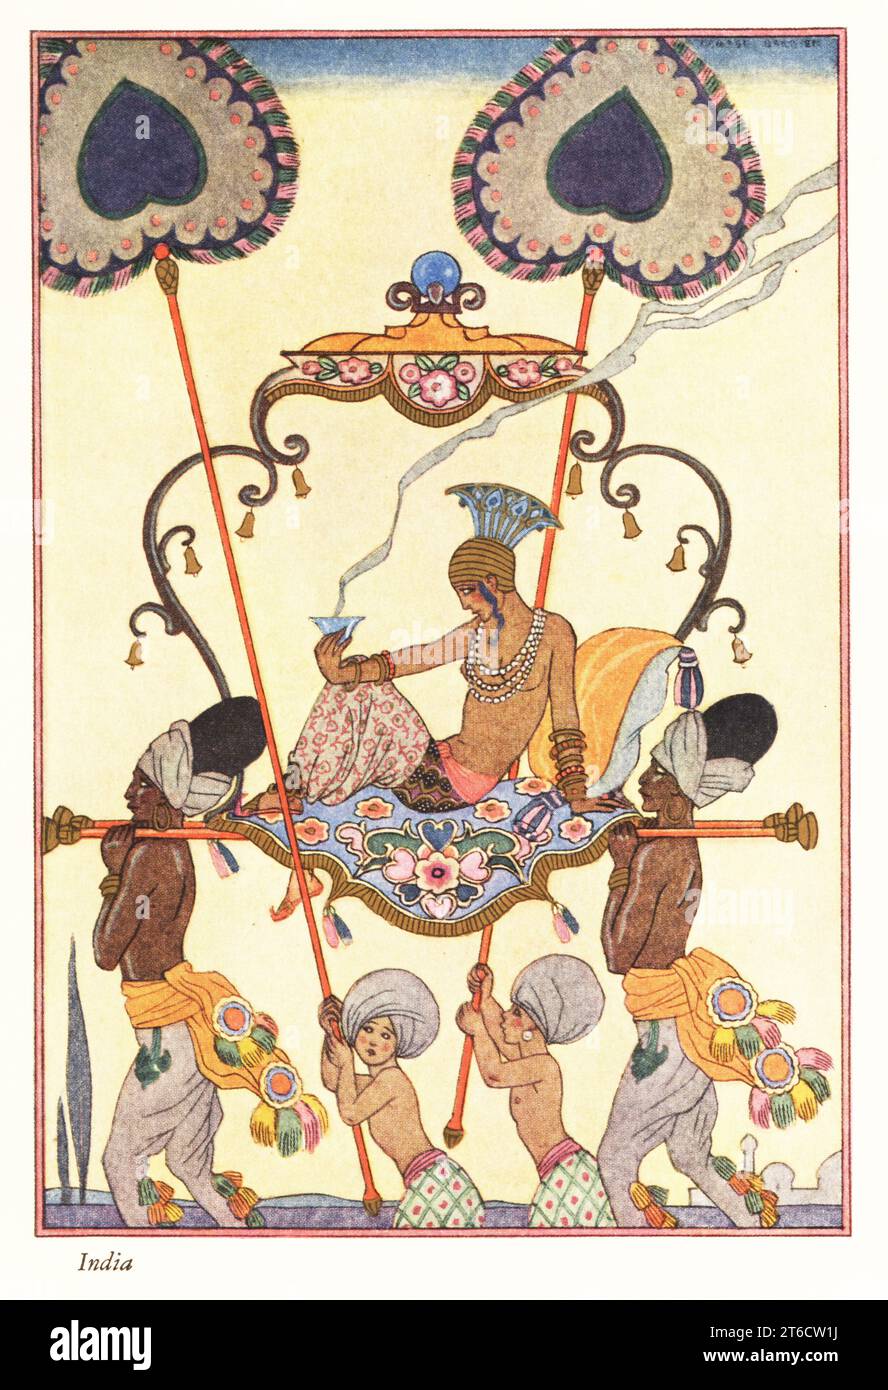 A noble woman burns incense while being carried on a palanquin, ancient India. Two punkhawallahs in turbans wave large fans to keep her cool. Smithsonian-process colour print after Art Deco master George Barbier from Richard le Galliennes Romance of Perfume, Hudnut, New York, 1928. Stock Photo